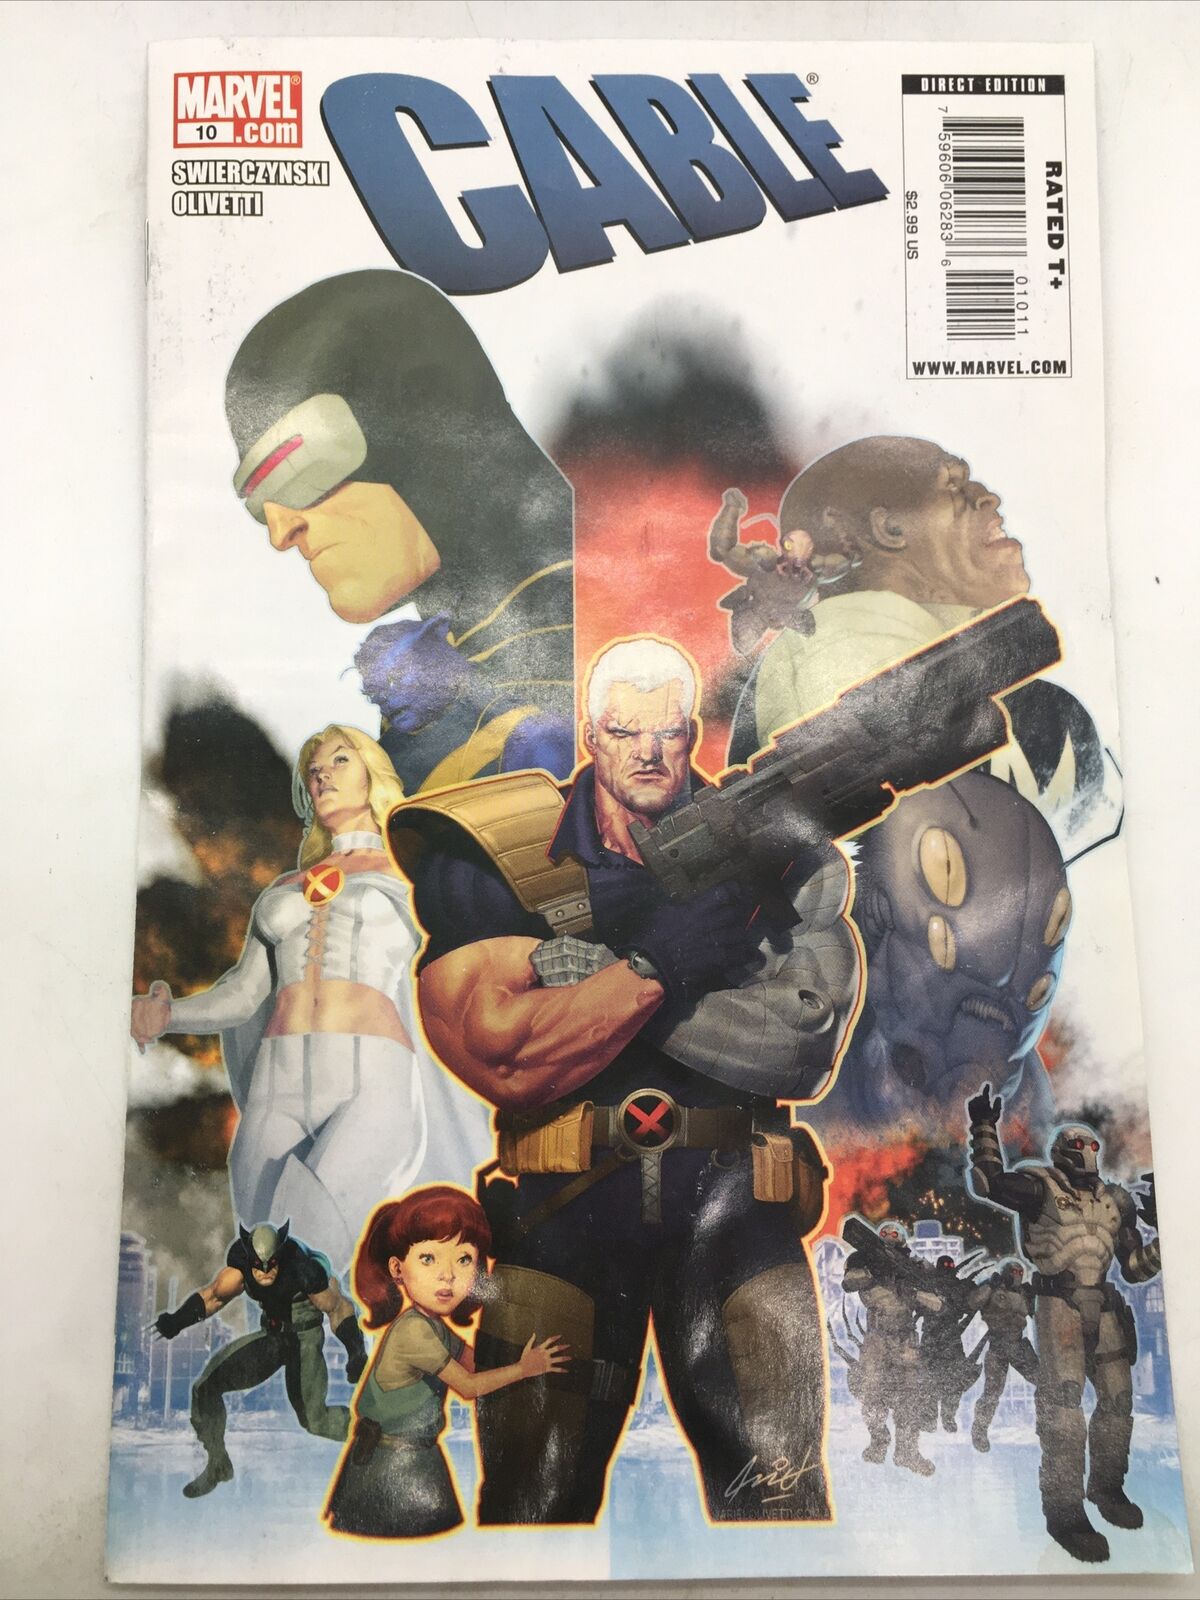 CABLE #10 (2ND SERIES) MARVEL COMICS 2009